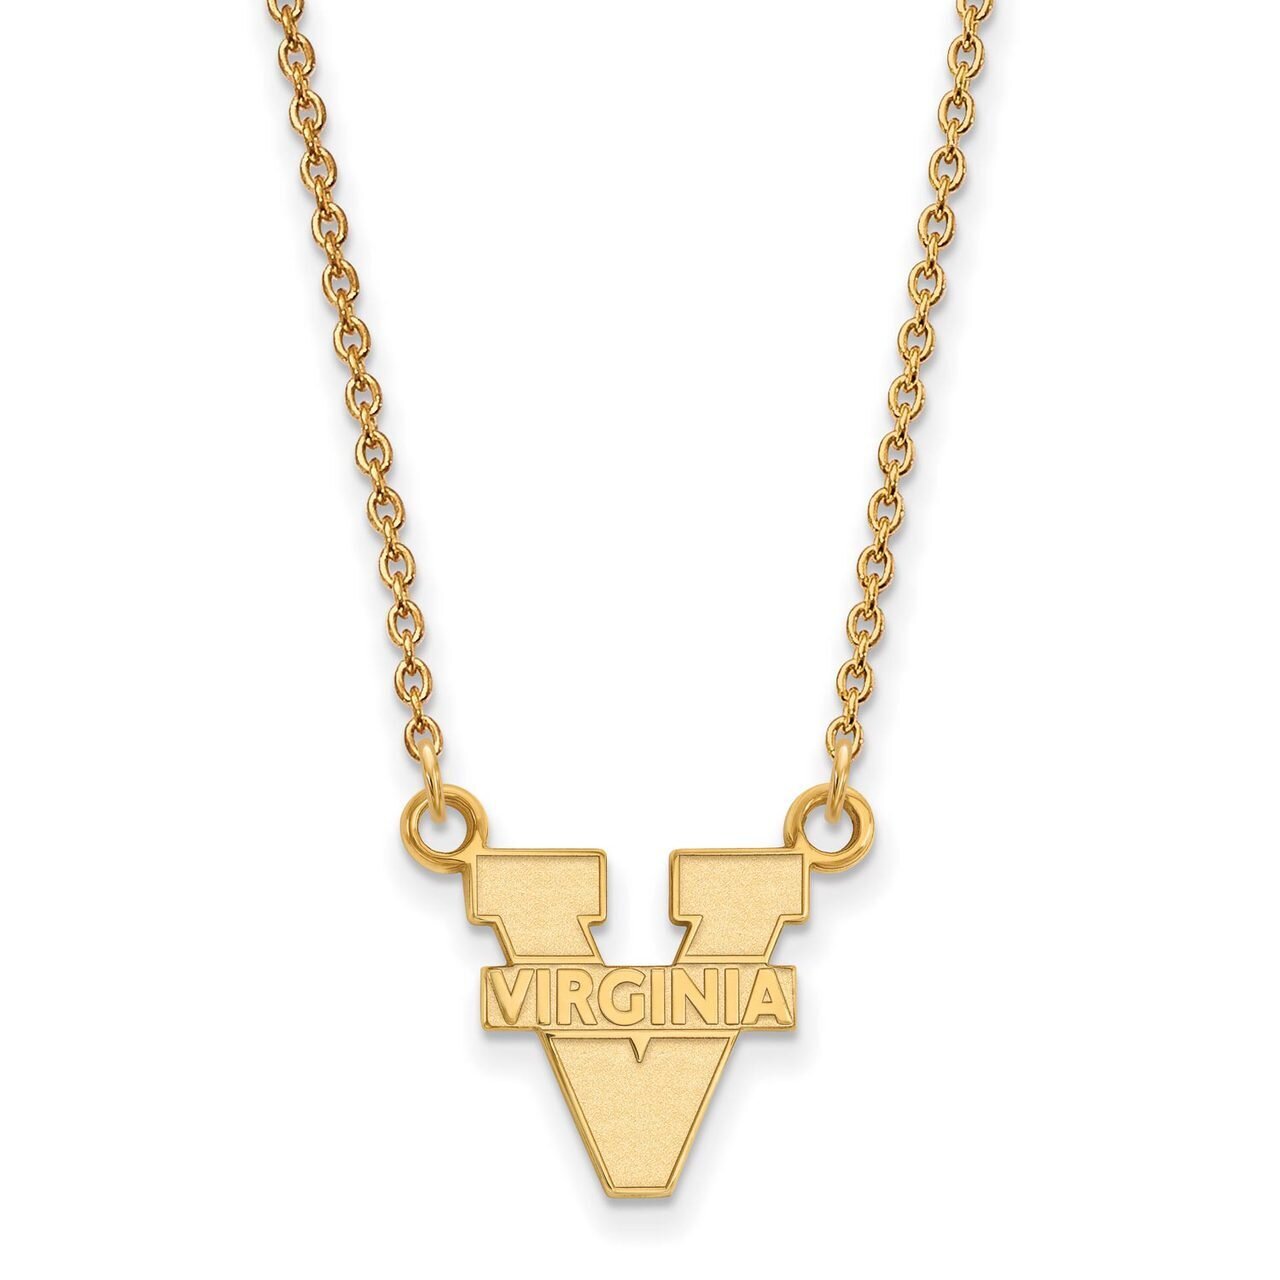 University of Virginia Small Pendant with Chain Necklace 14k Yellow Gold 4Y015UVA-18